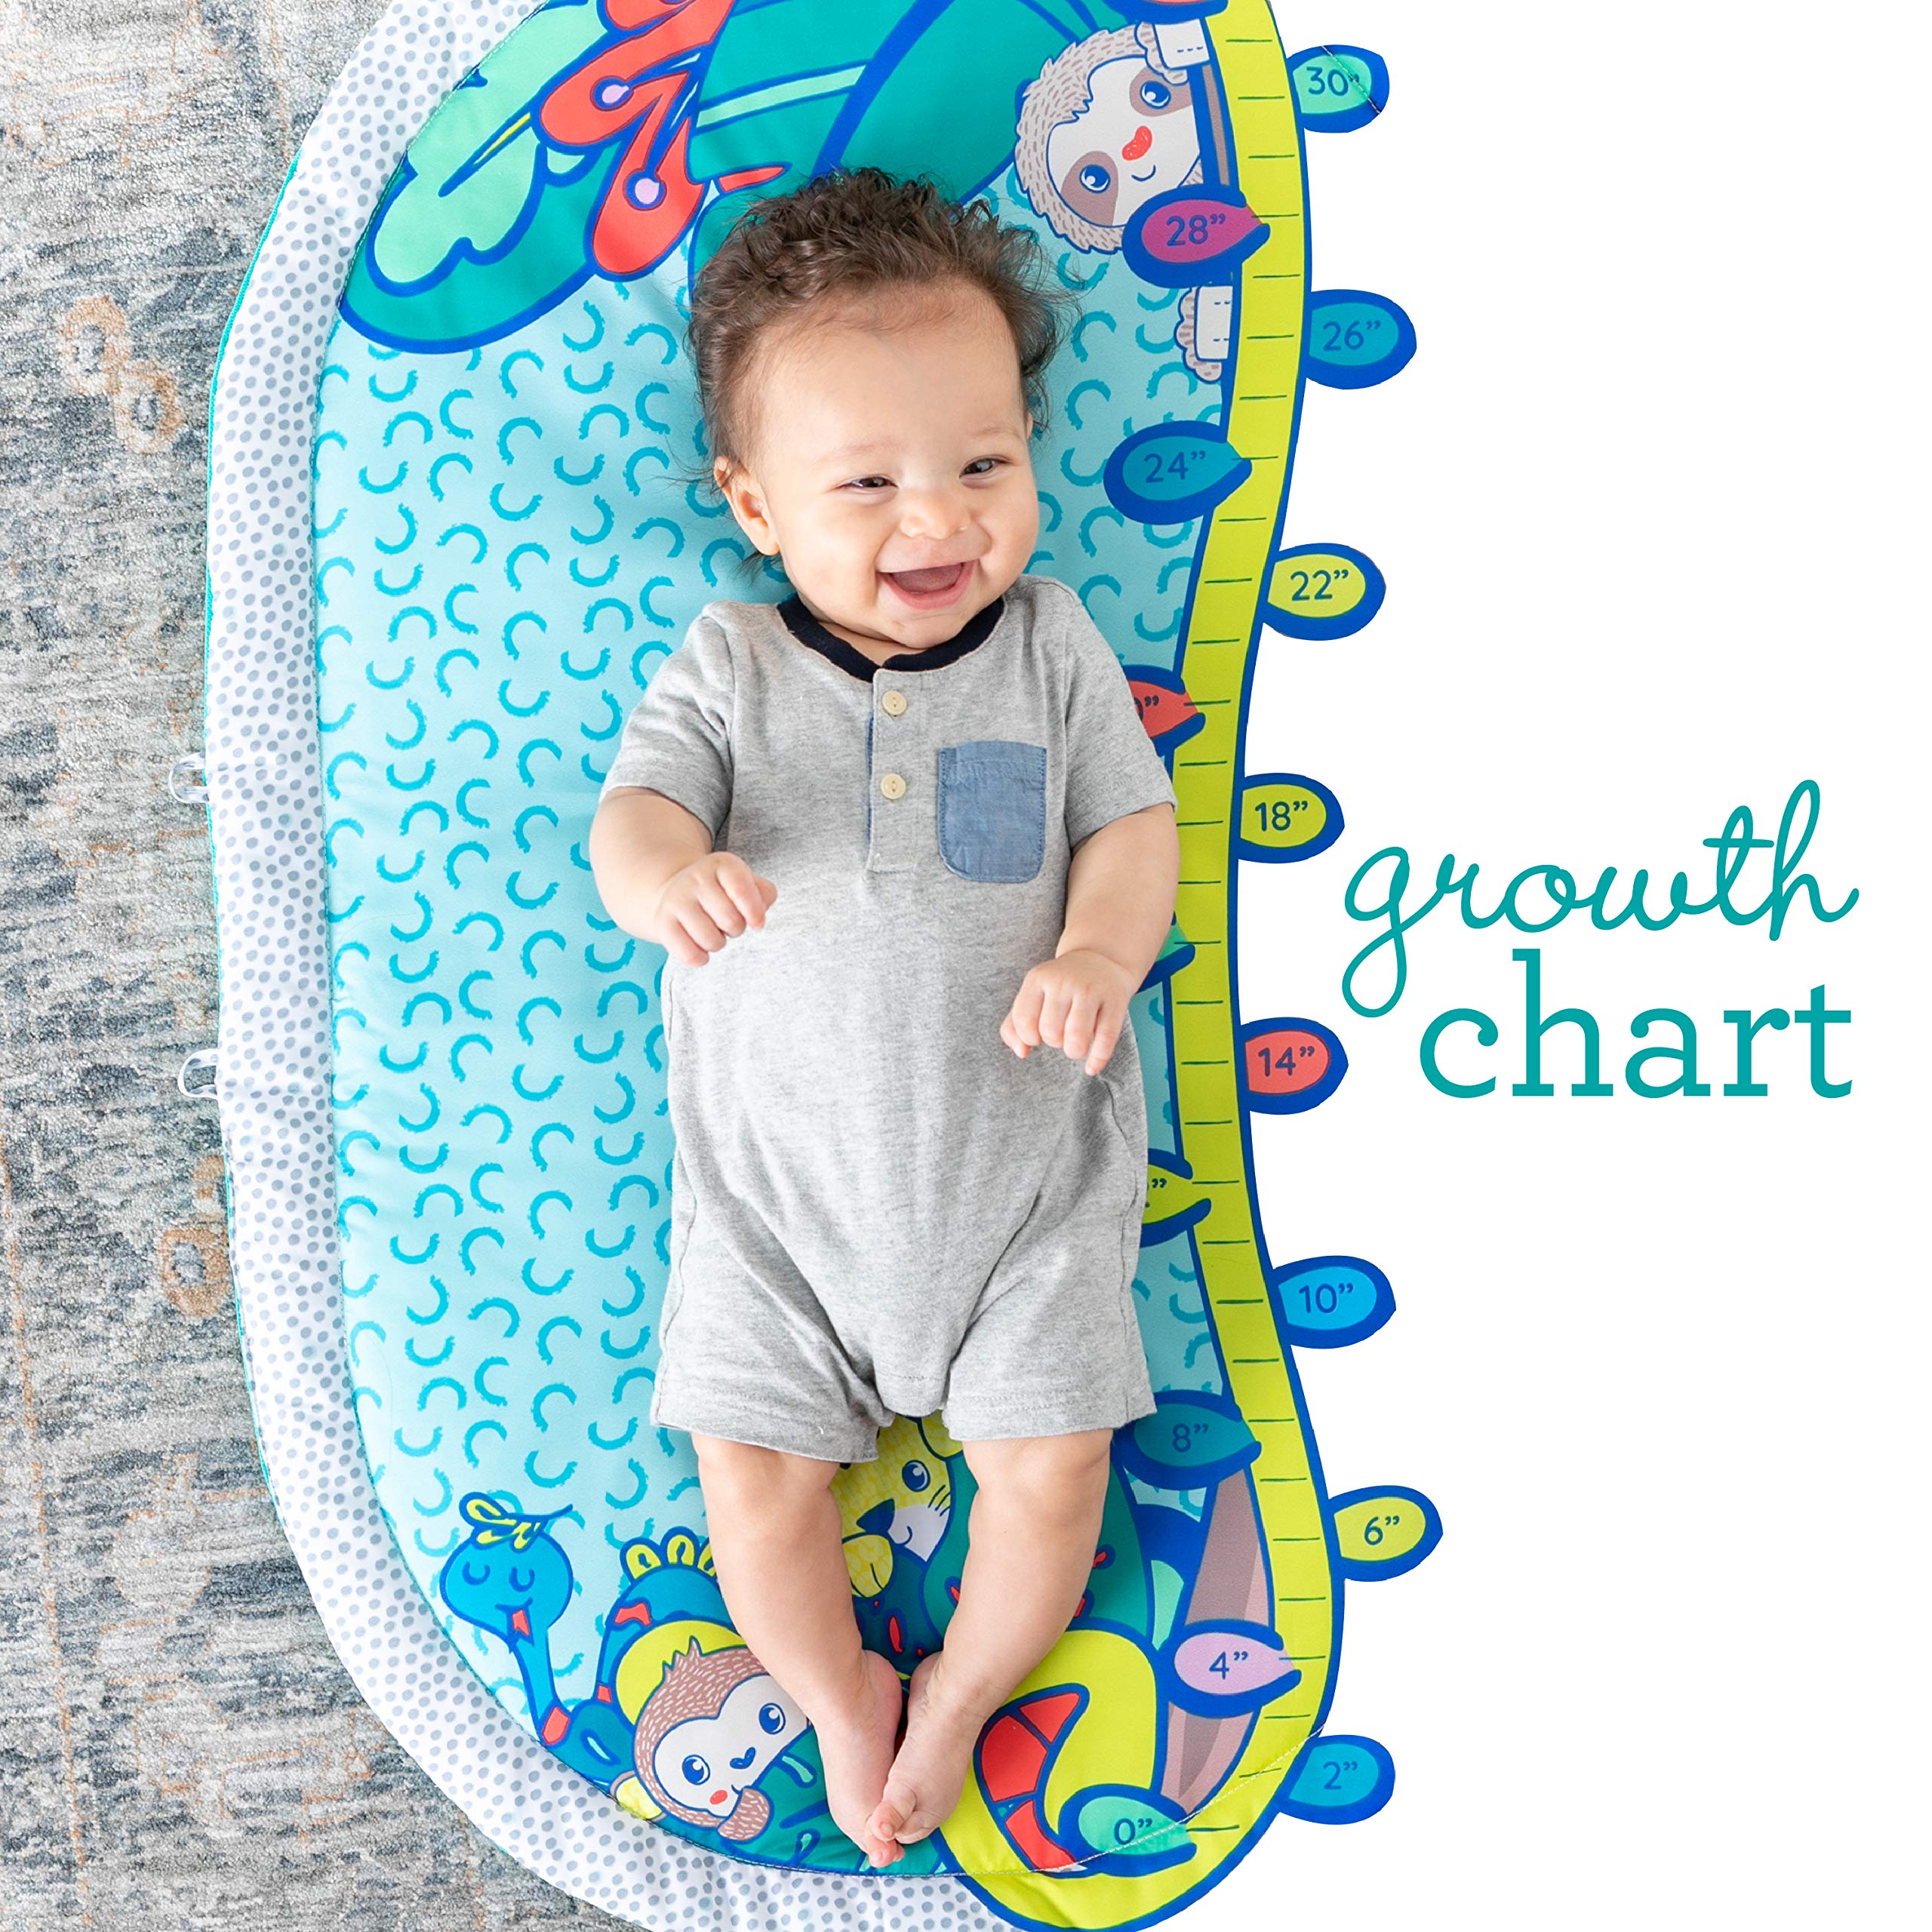 Infantino 3-in-1 Deluxe Magic Arch Sensory Development Gym - 3 Ways to Play with Dual-Sided Magical Arch for Captivating Overhead Visuals Plus Tummy-Time Bolster & Mat with Growth Chart, Teal